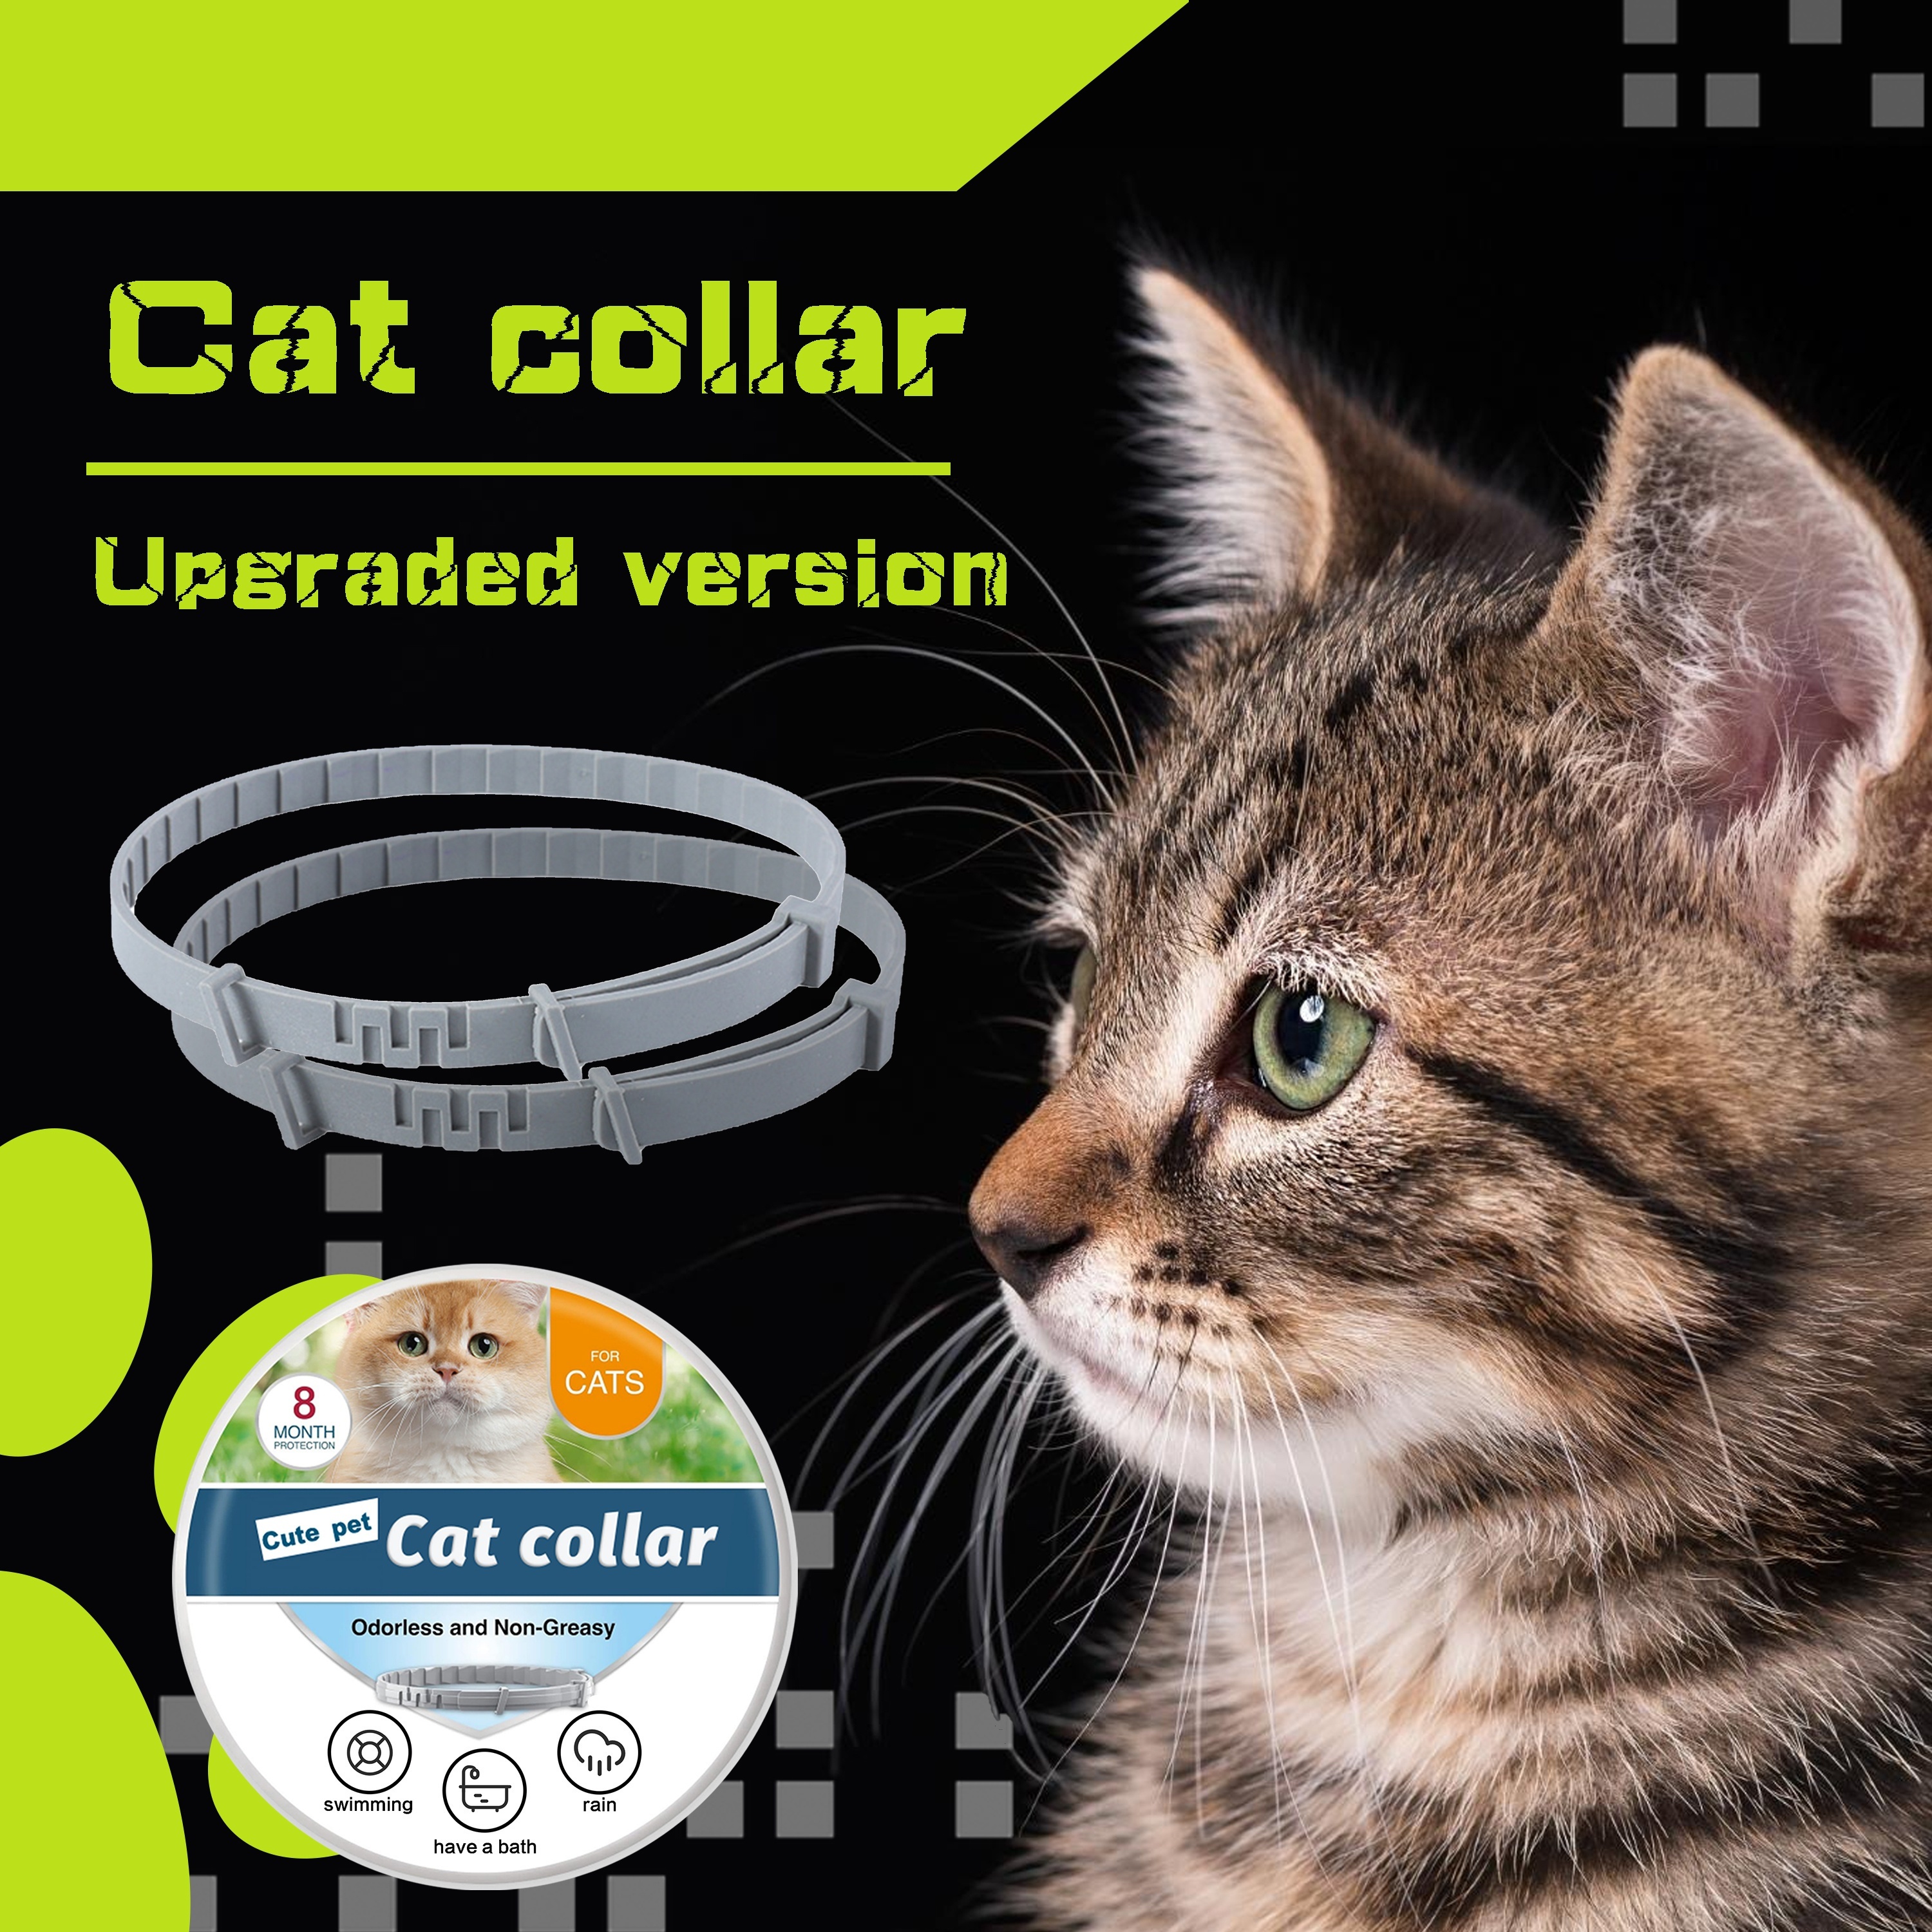 

[veterinary Recommendation] The Highest Sales Of Cat Special Waterproof Collar, Built-in Plant Formula, Circumference 39cm, Adjustable Size, Long-term Protection For 8 Months.